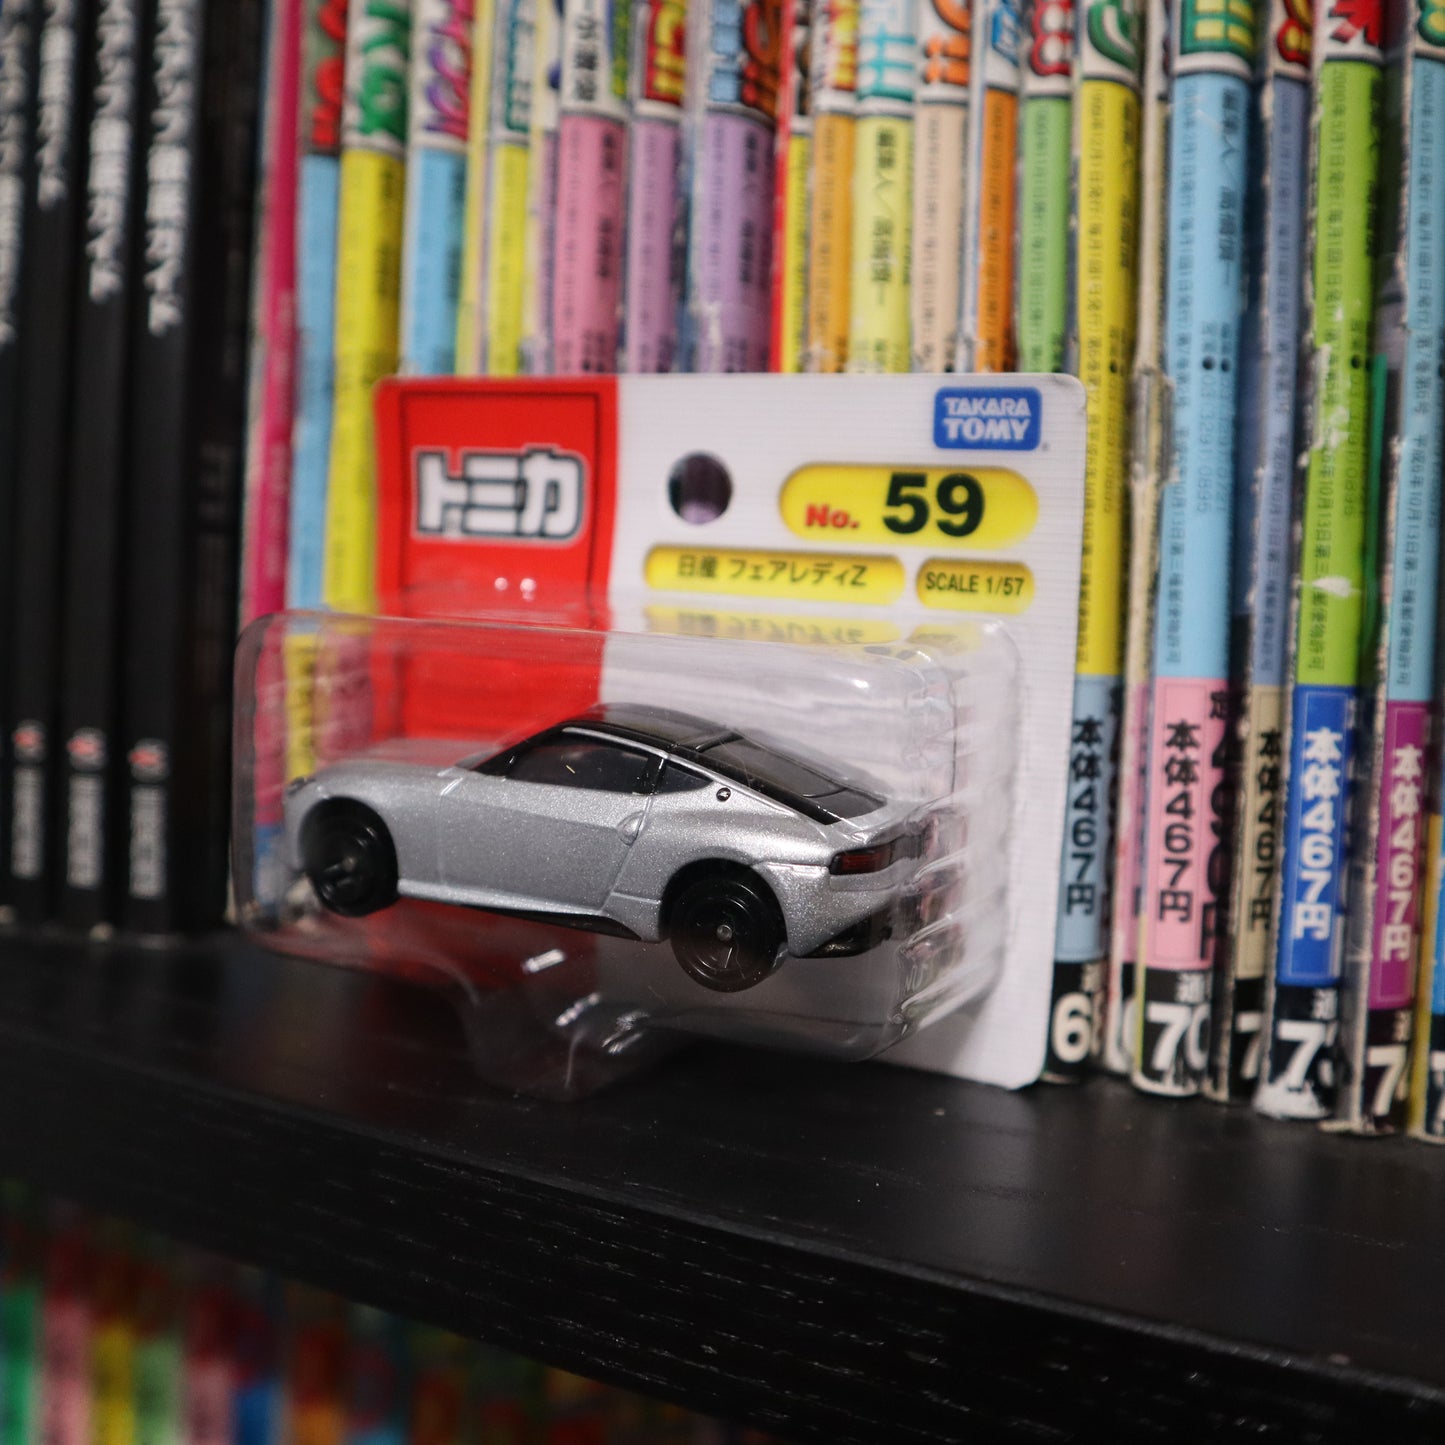 Tomica Nissan Fairlady Z (Blister Package)